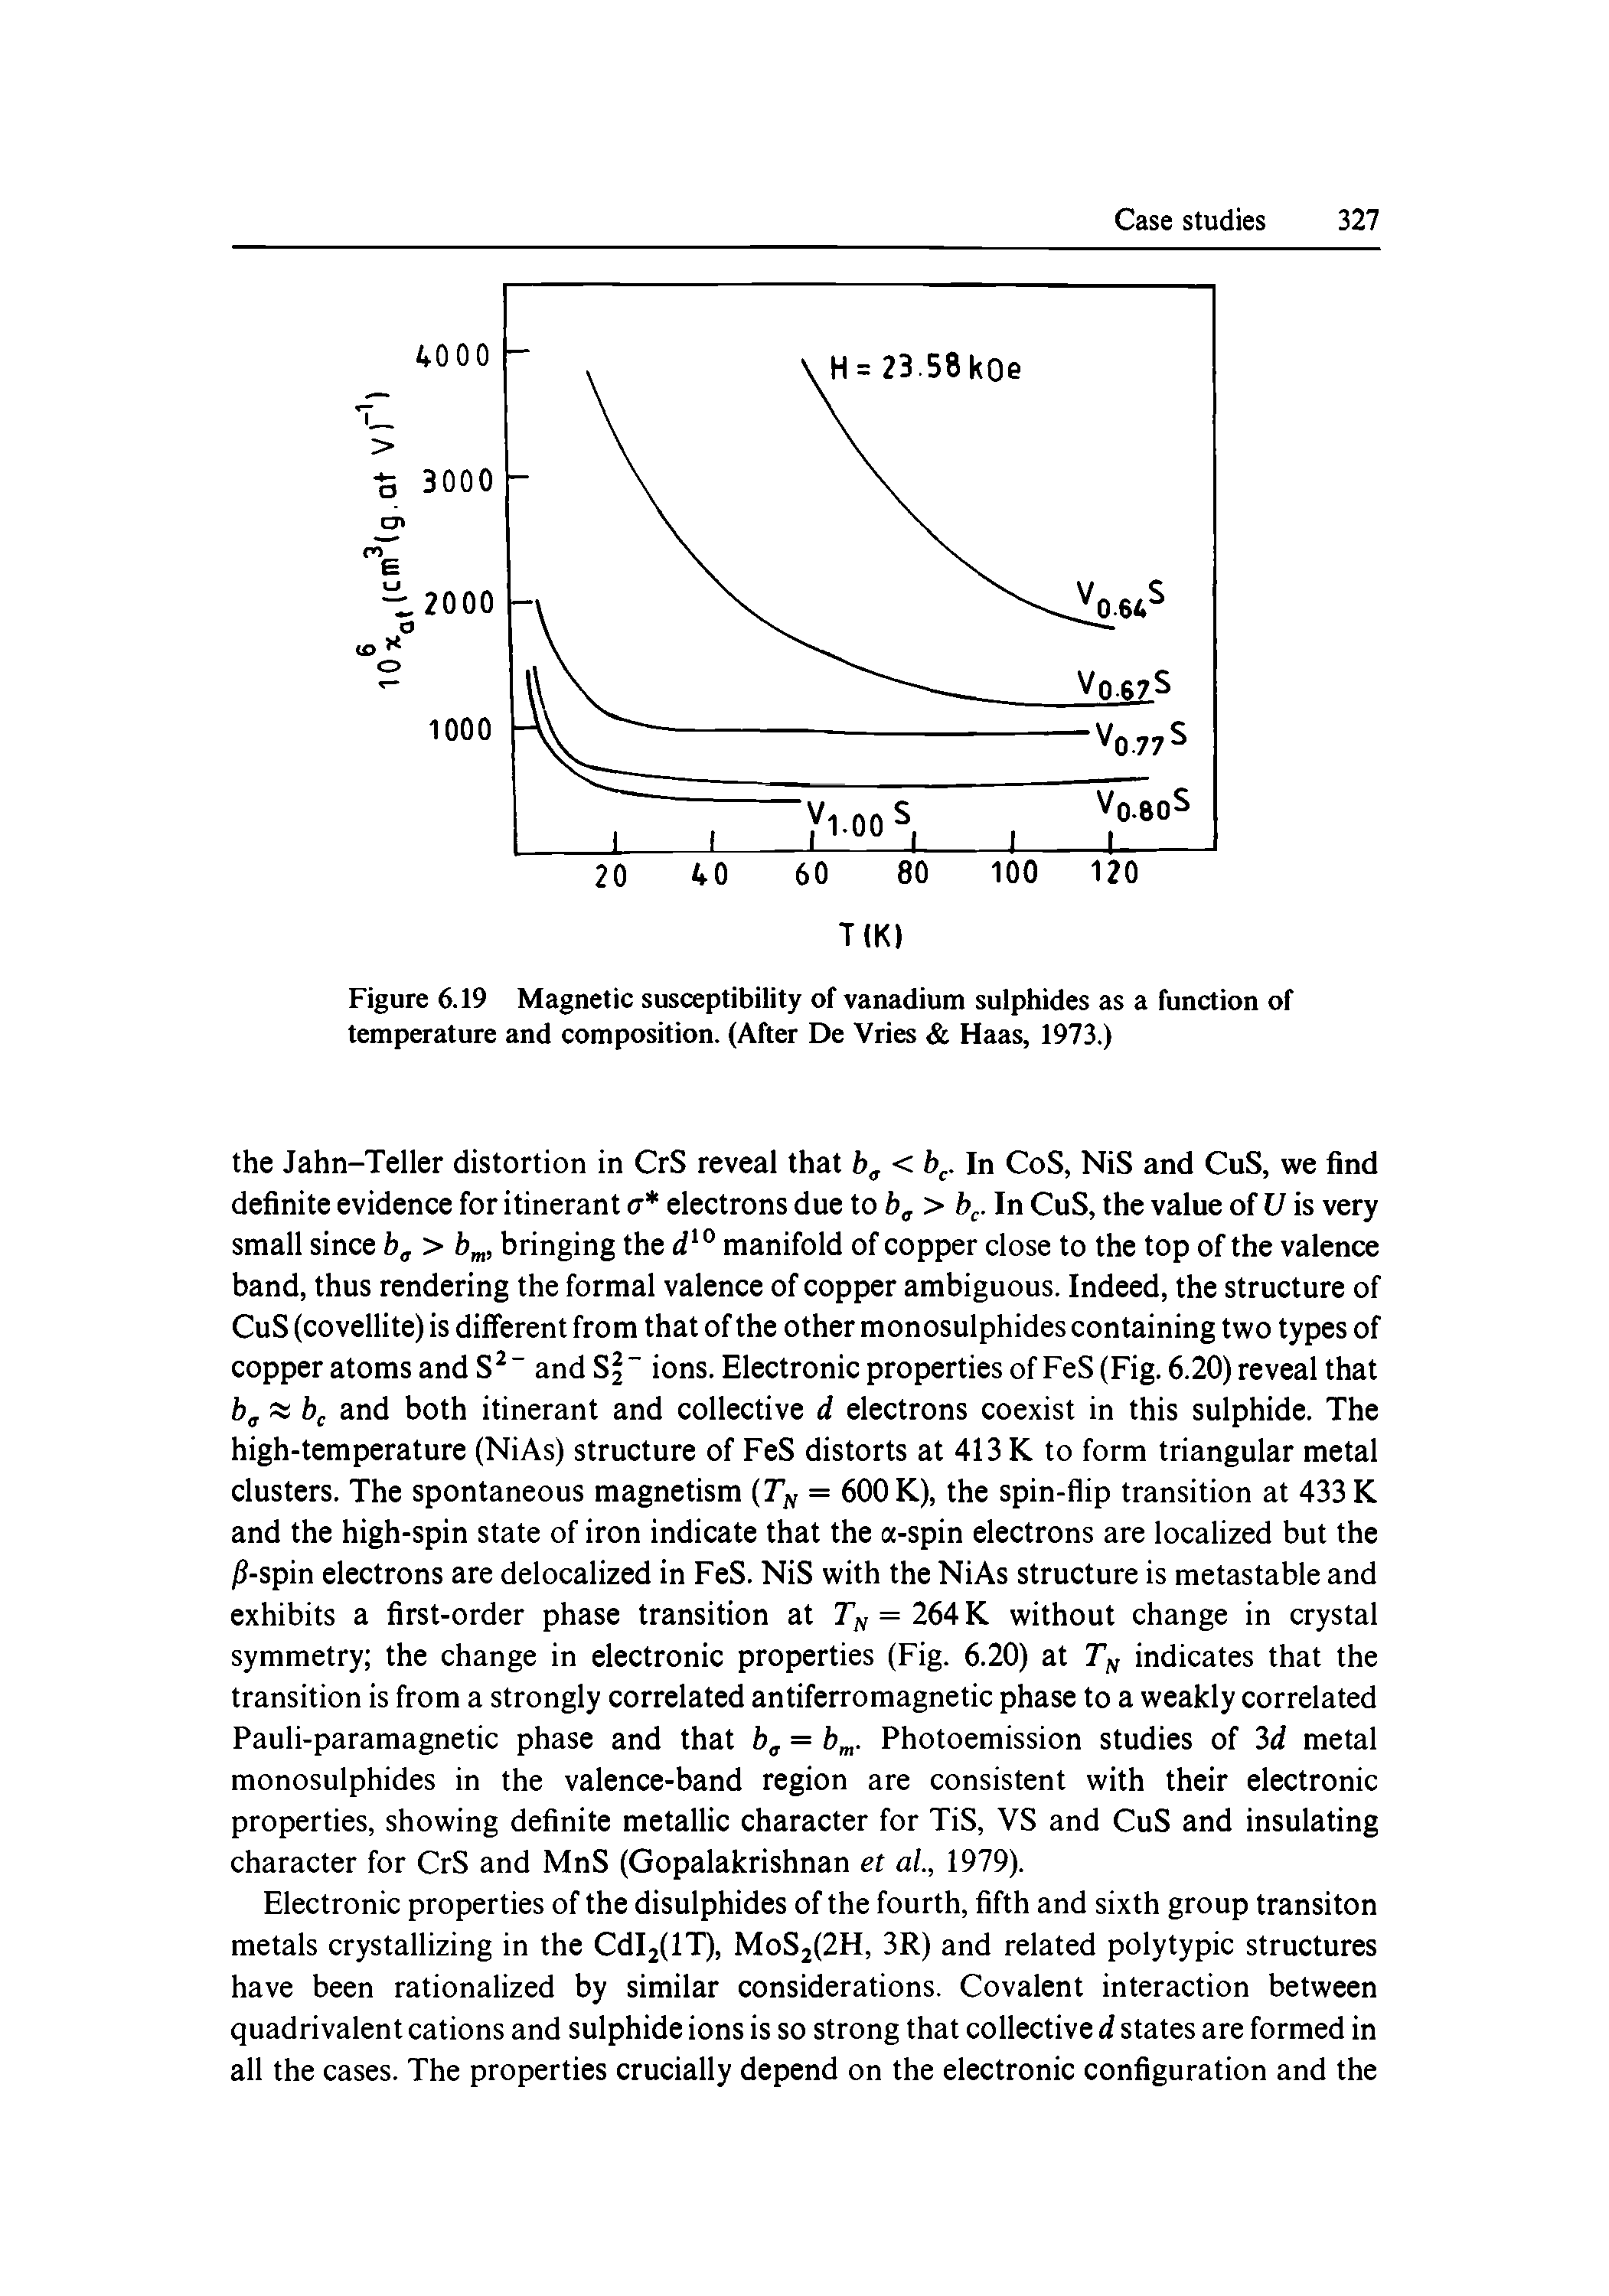 Figure 6.19 Magnetic susceptibility of vanadium sulphides as a function of temperature and composition. (After De Vries Haas, 1973.)...